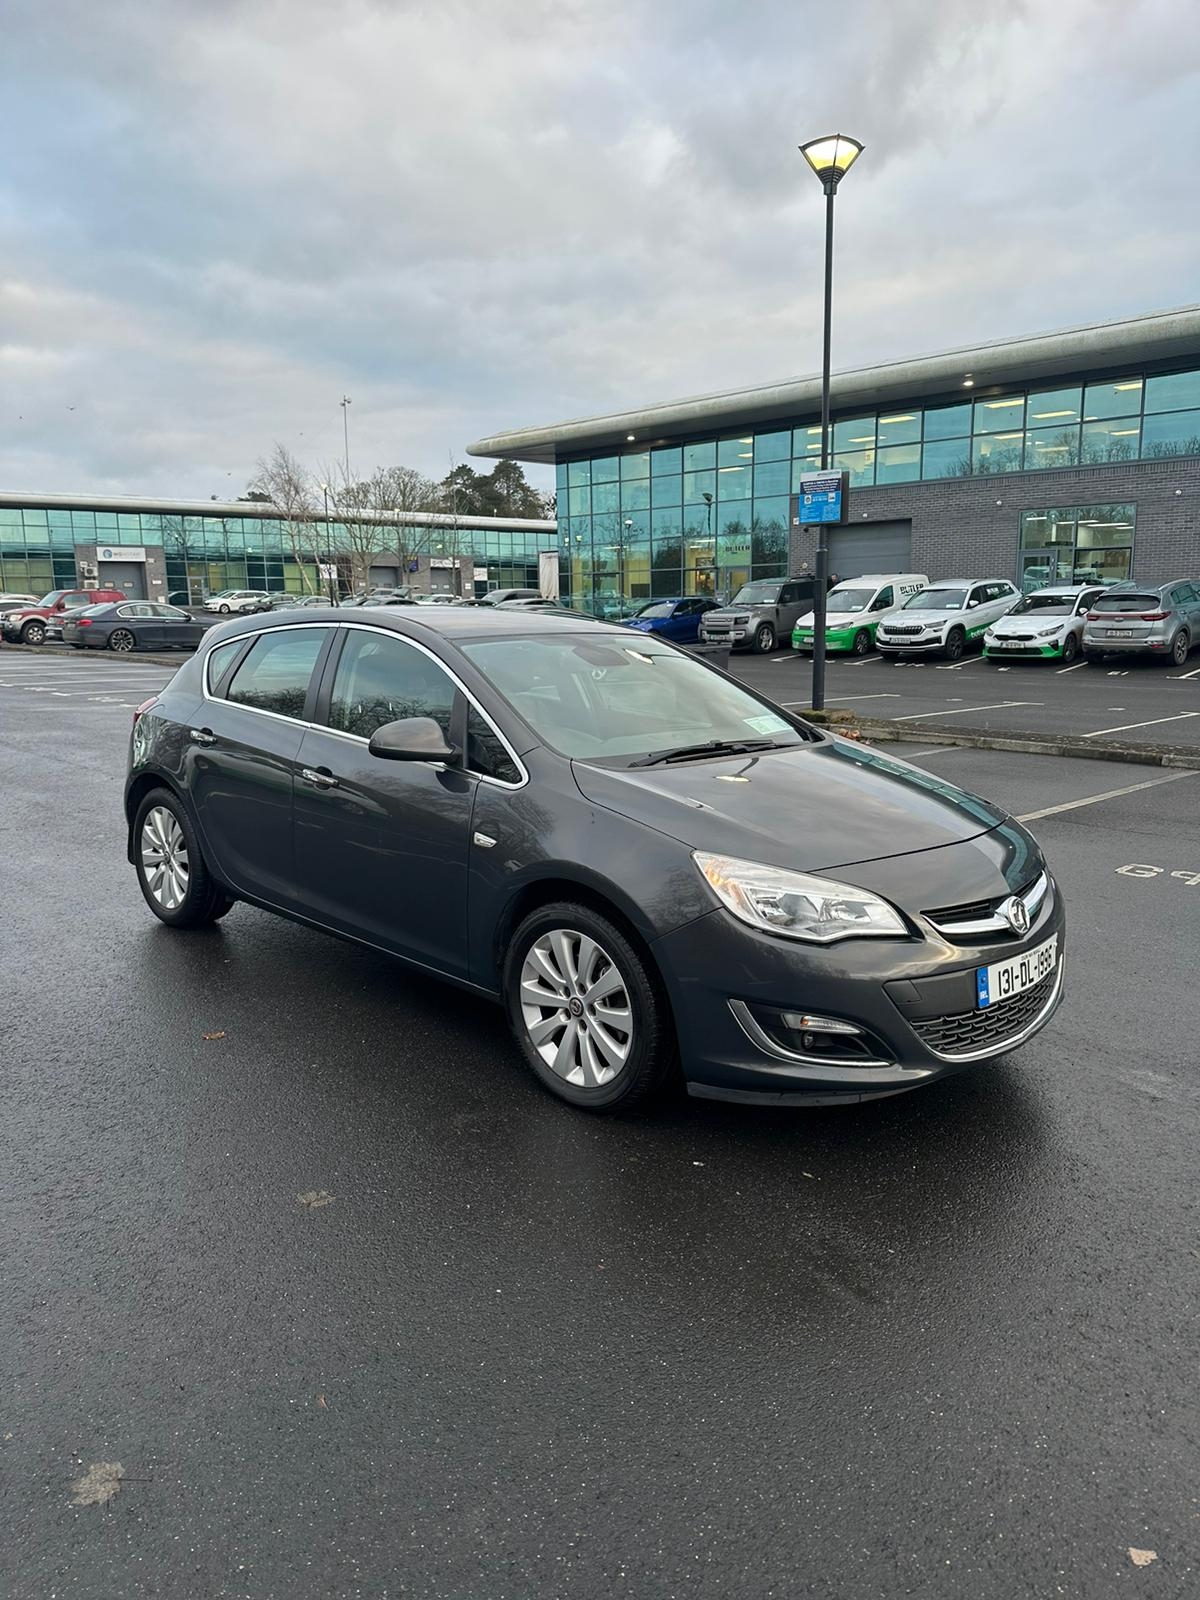 Used Vauxhall Astra 2013 in Kildare